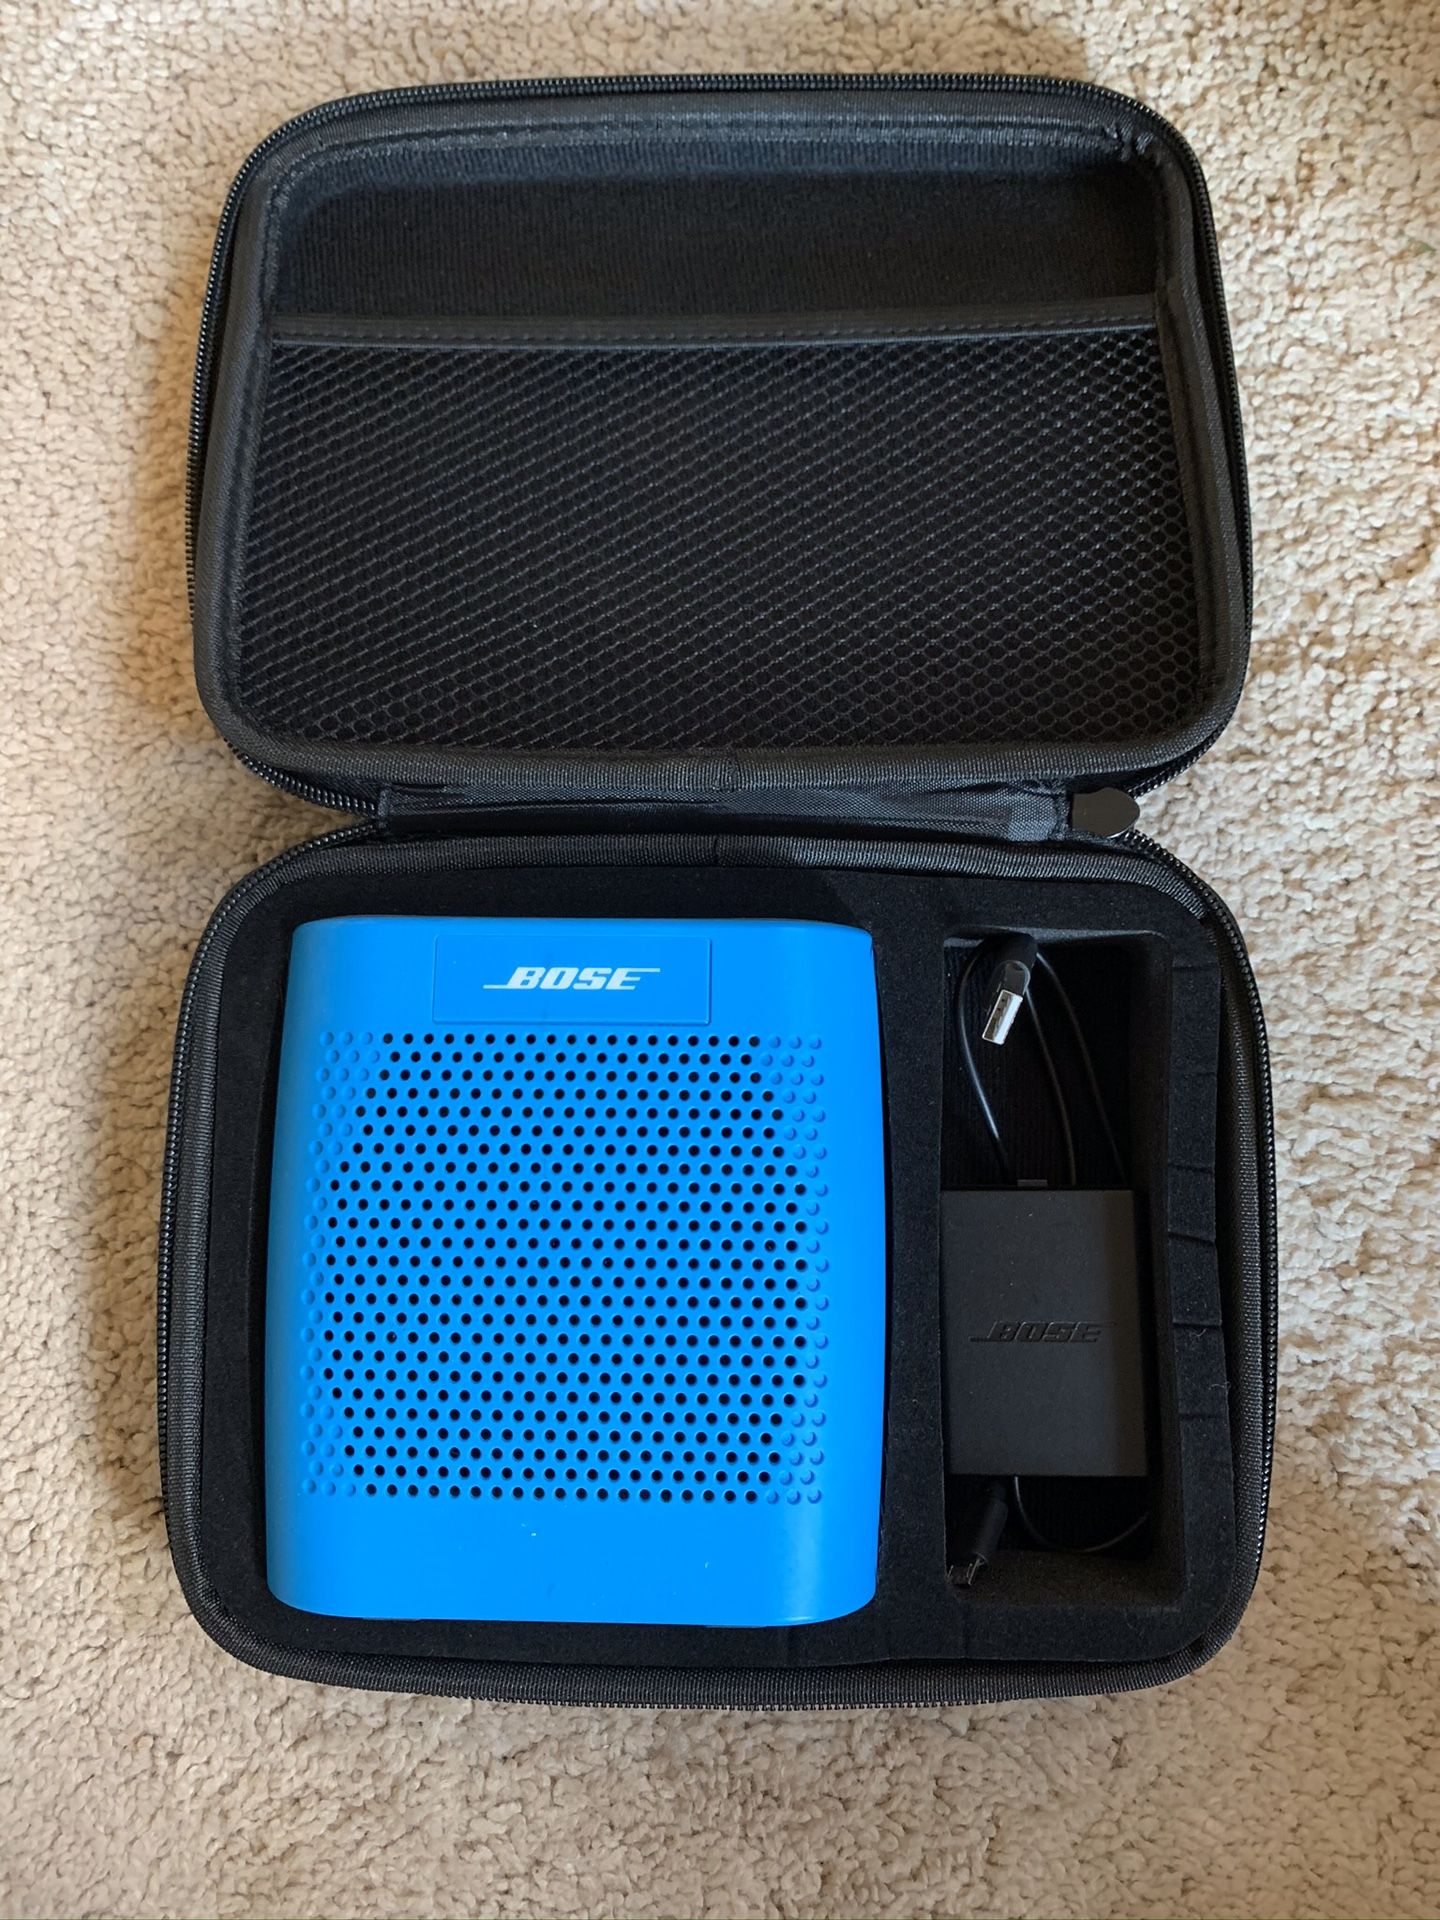 Used/Excellent Condition Bose Soundlink Color Portable Speaker w/ Travel Case & Charger